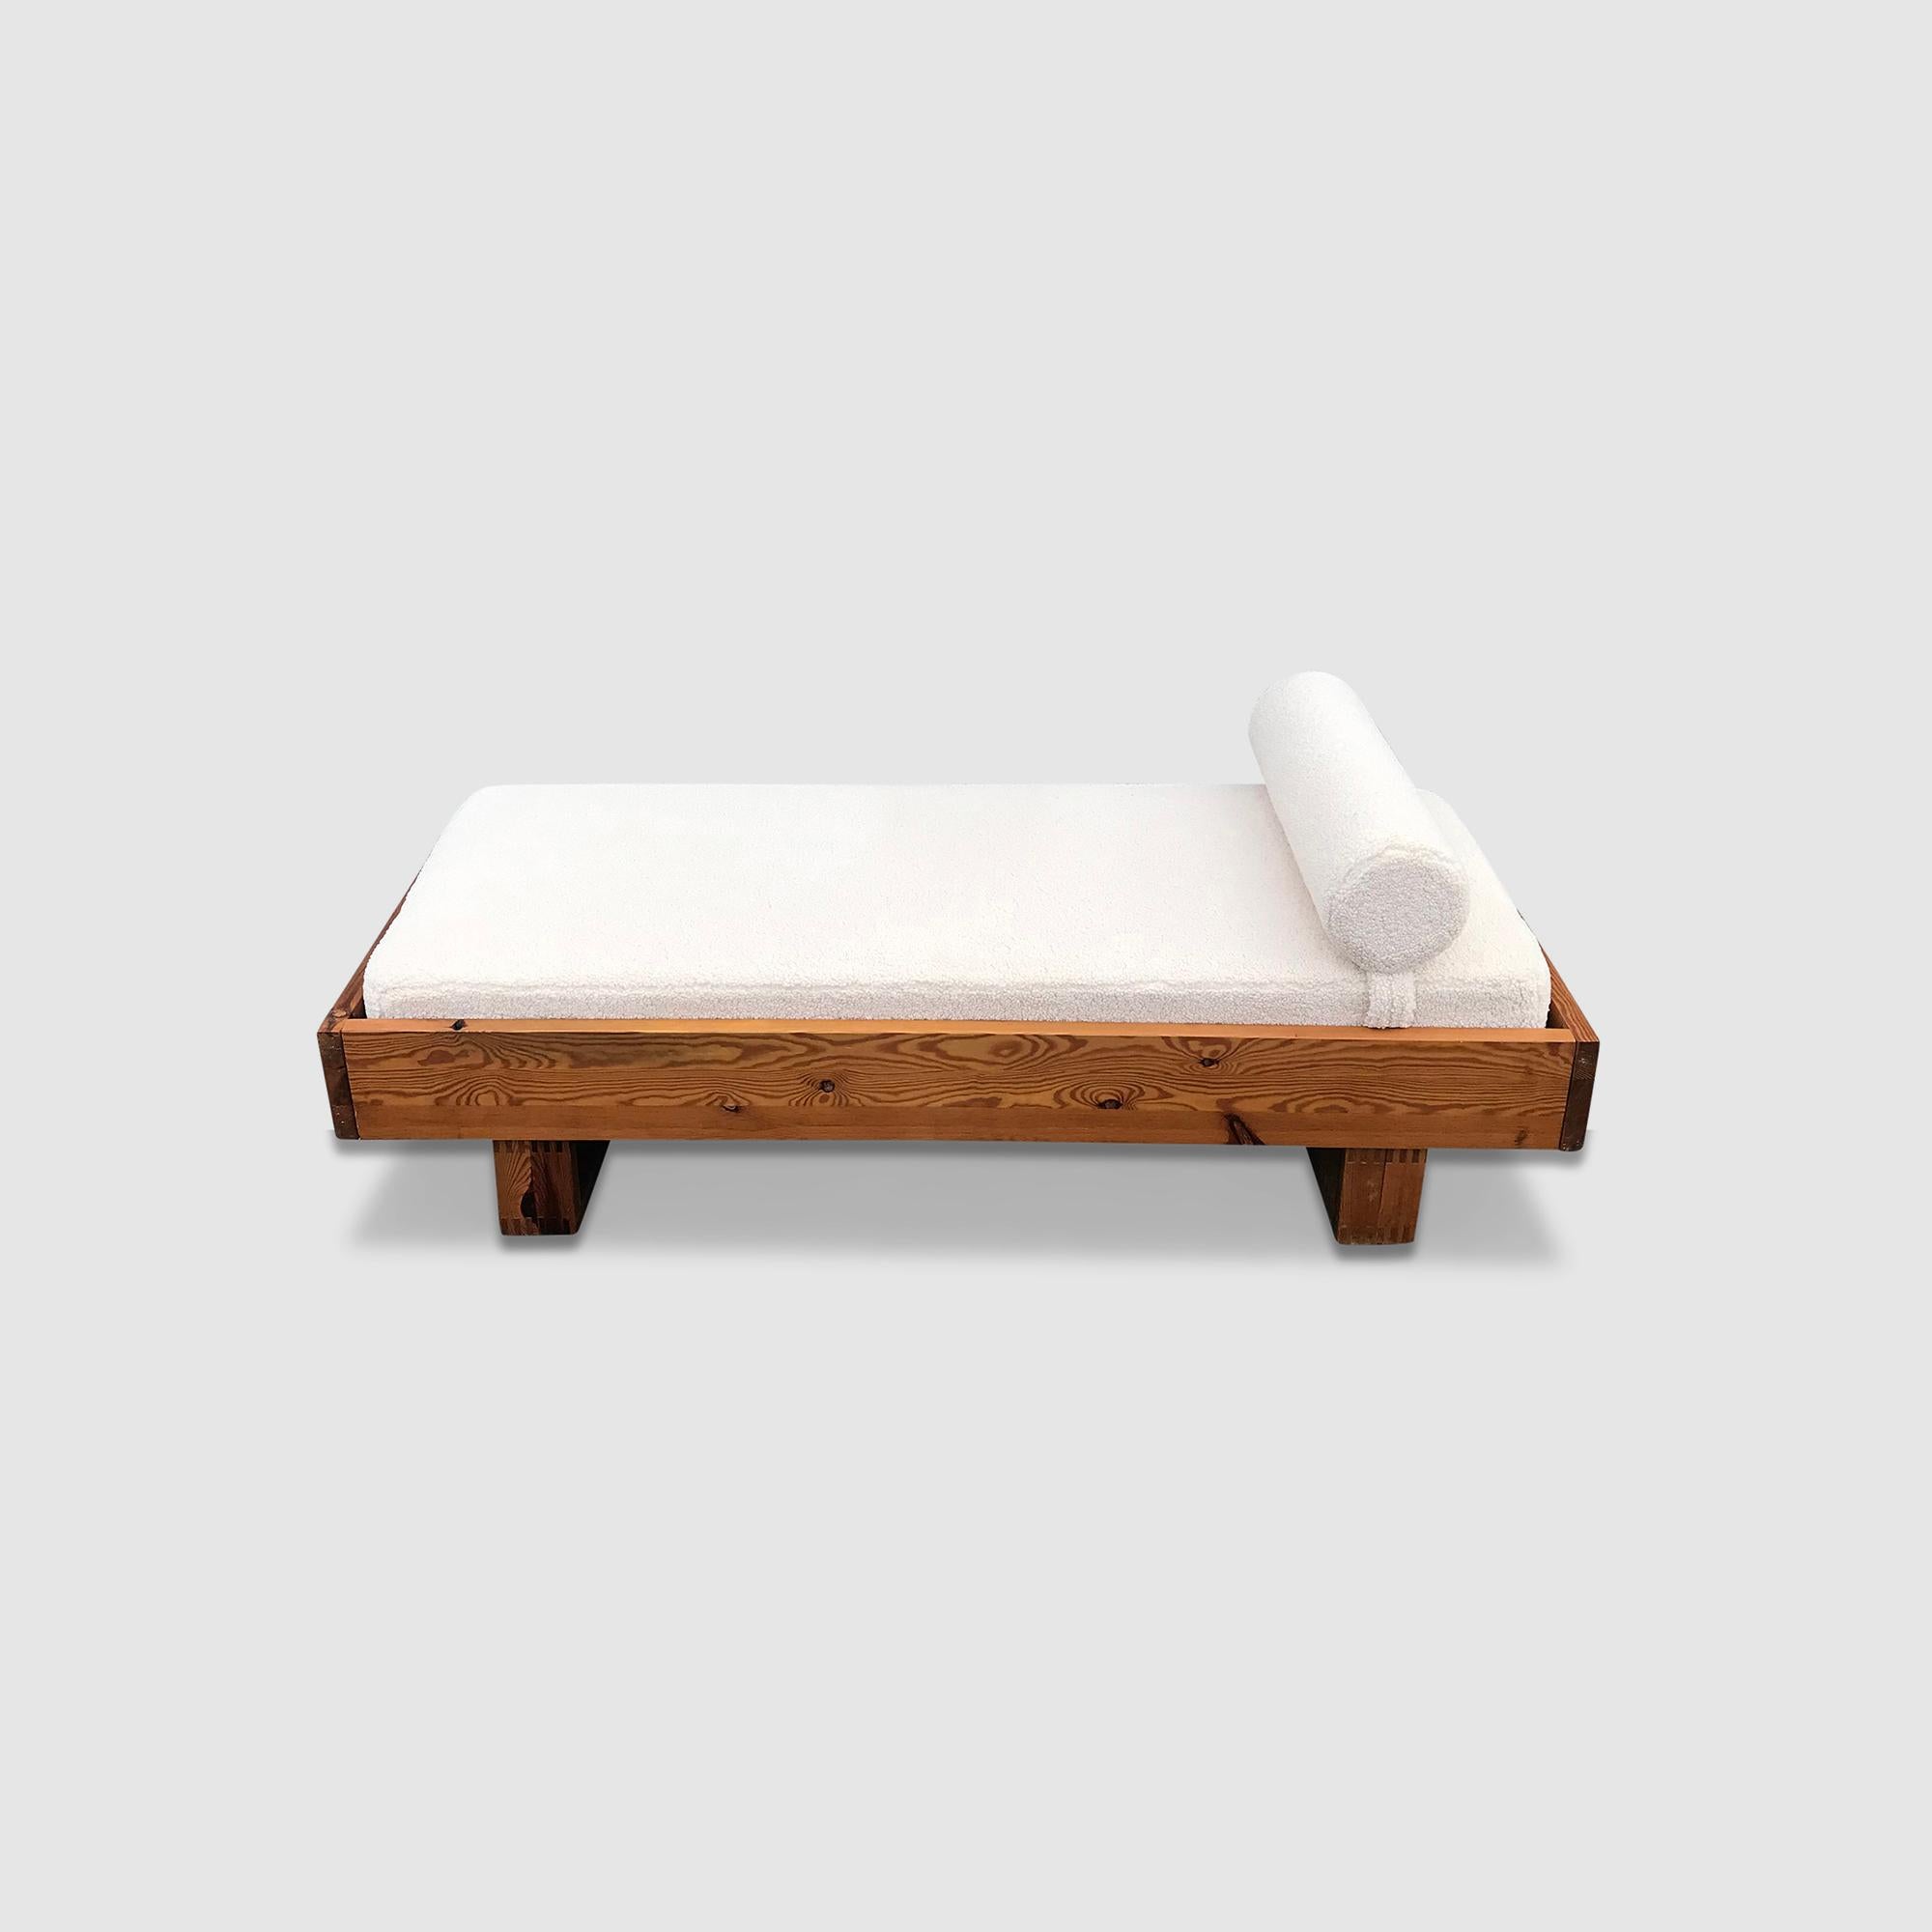 Late 20th Century Modernist pine and bouclé daybed by Ate van Apeldoorn for Houtwerk Hattem 1970s